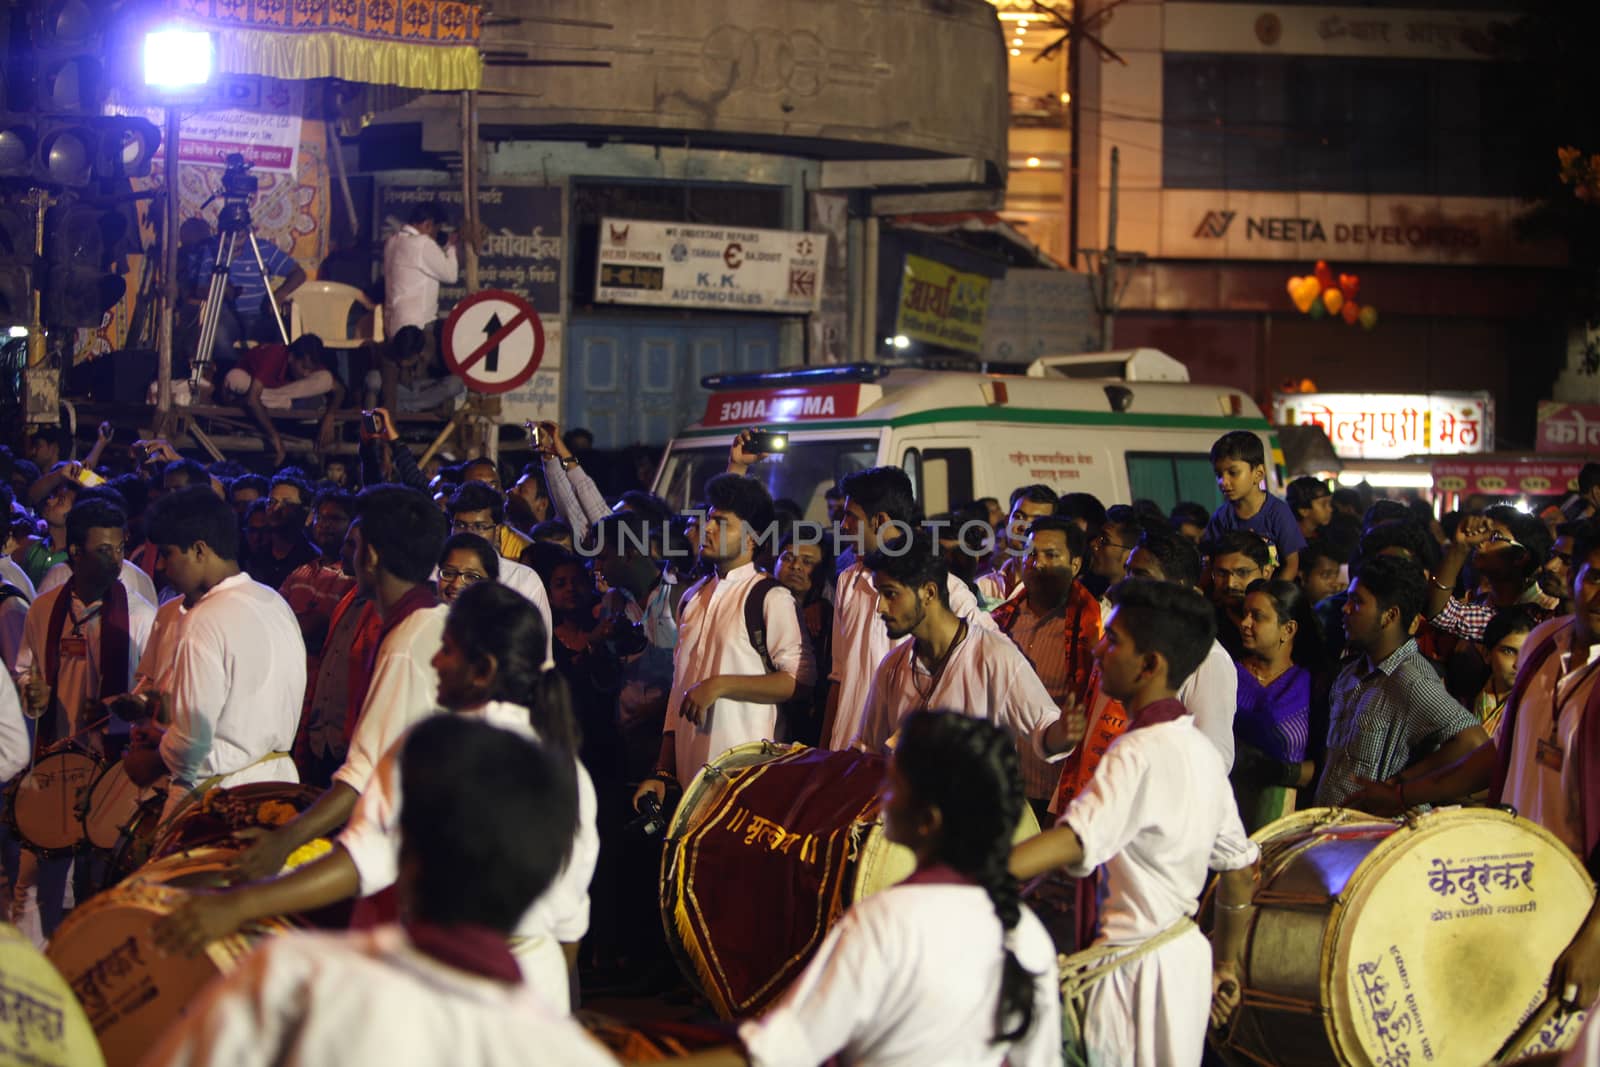 Pune, India - September 27, 2015: People in India dancing on the by thefinalmiracle